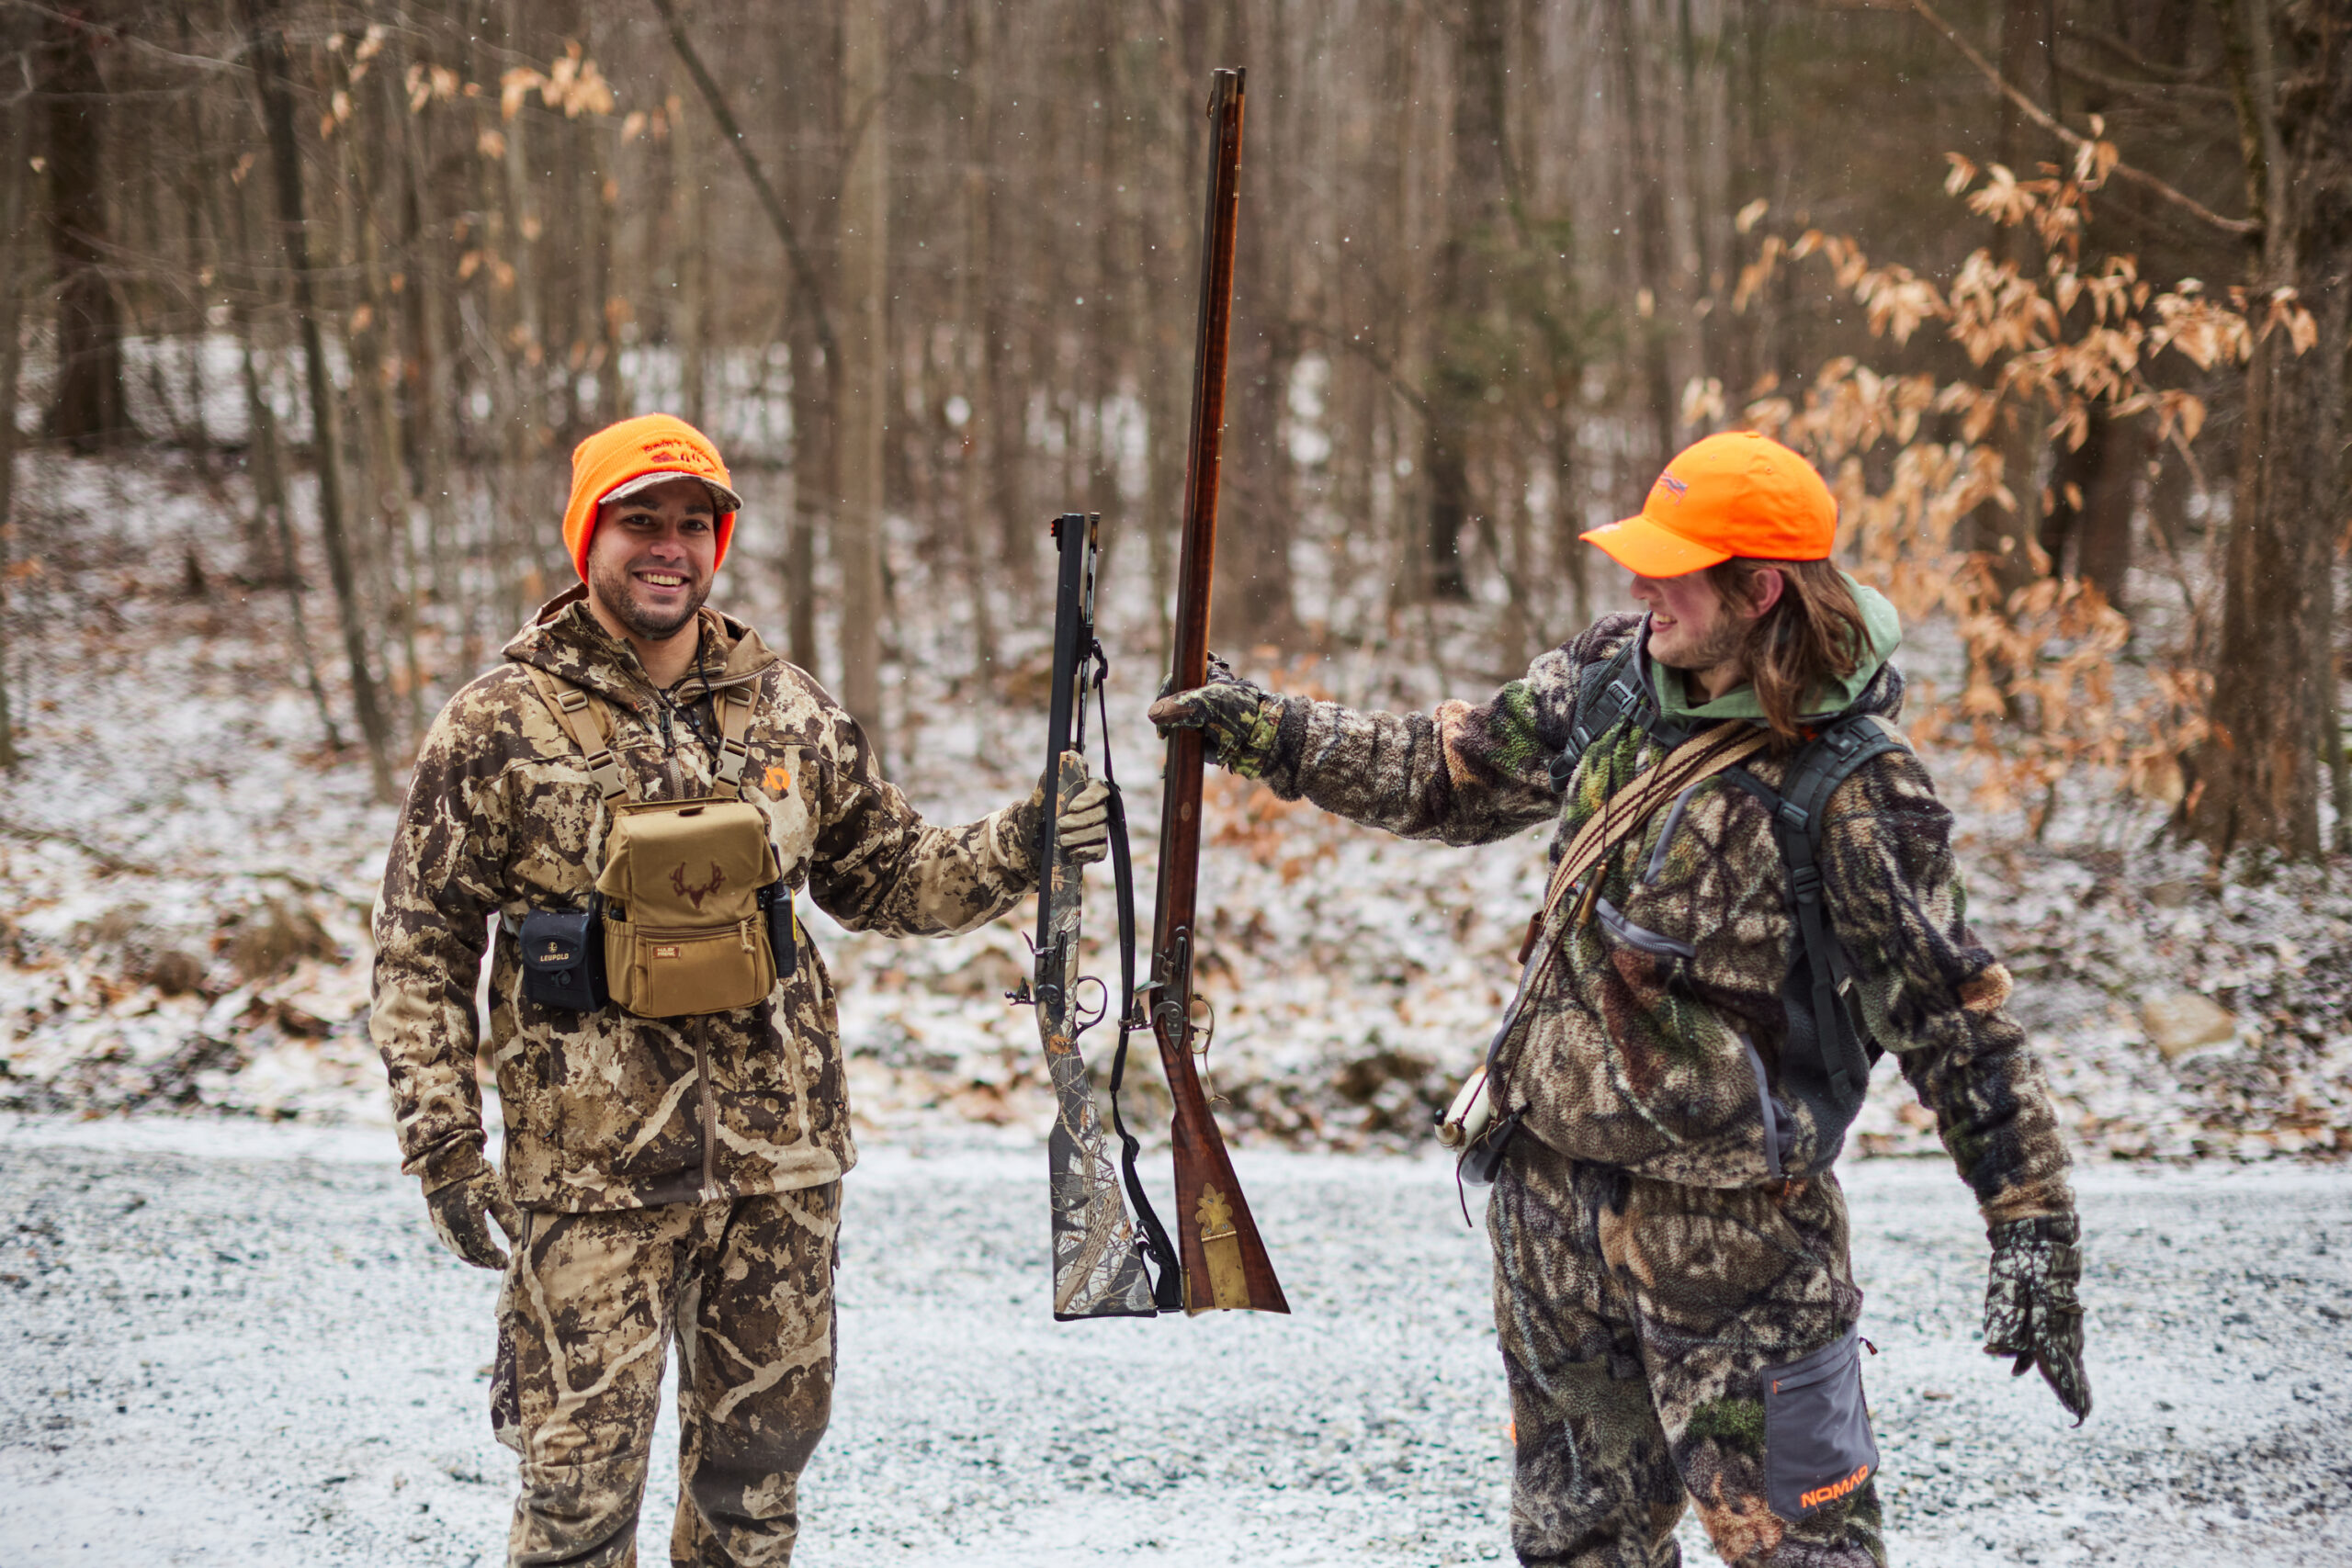 Two flintlock hunters compare rifles in the snowy woods of Pennsylvania.